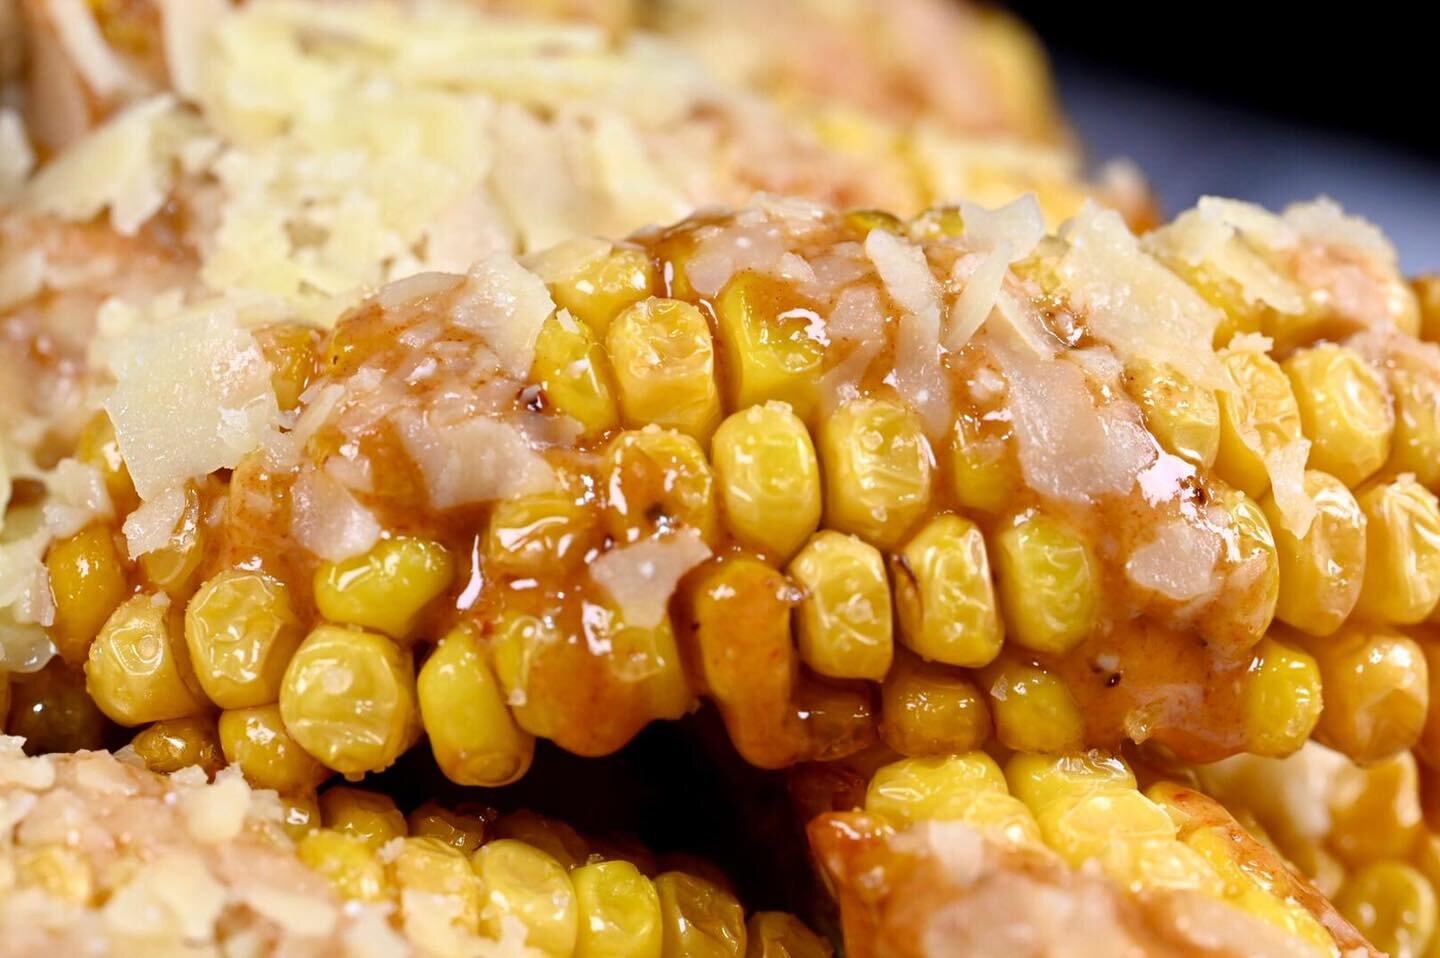 🚨🚨NEW SIDE🚨🚨

For a limited time only you can get CORN RIBS! 🌽🌽🌽🌽

It&rsquo;s time to get your nibble on.

Delicious strips of deep fried corn on the cob covered in our house-made chipotle maple mayo and parmesan cheese. 🤤🤤🤤